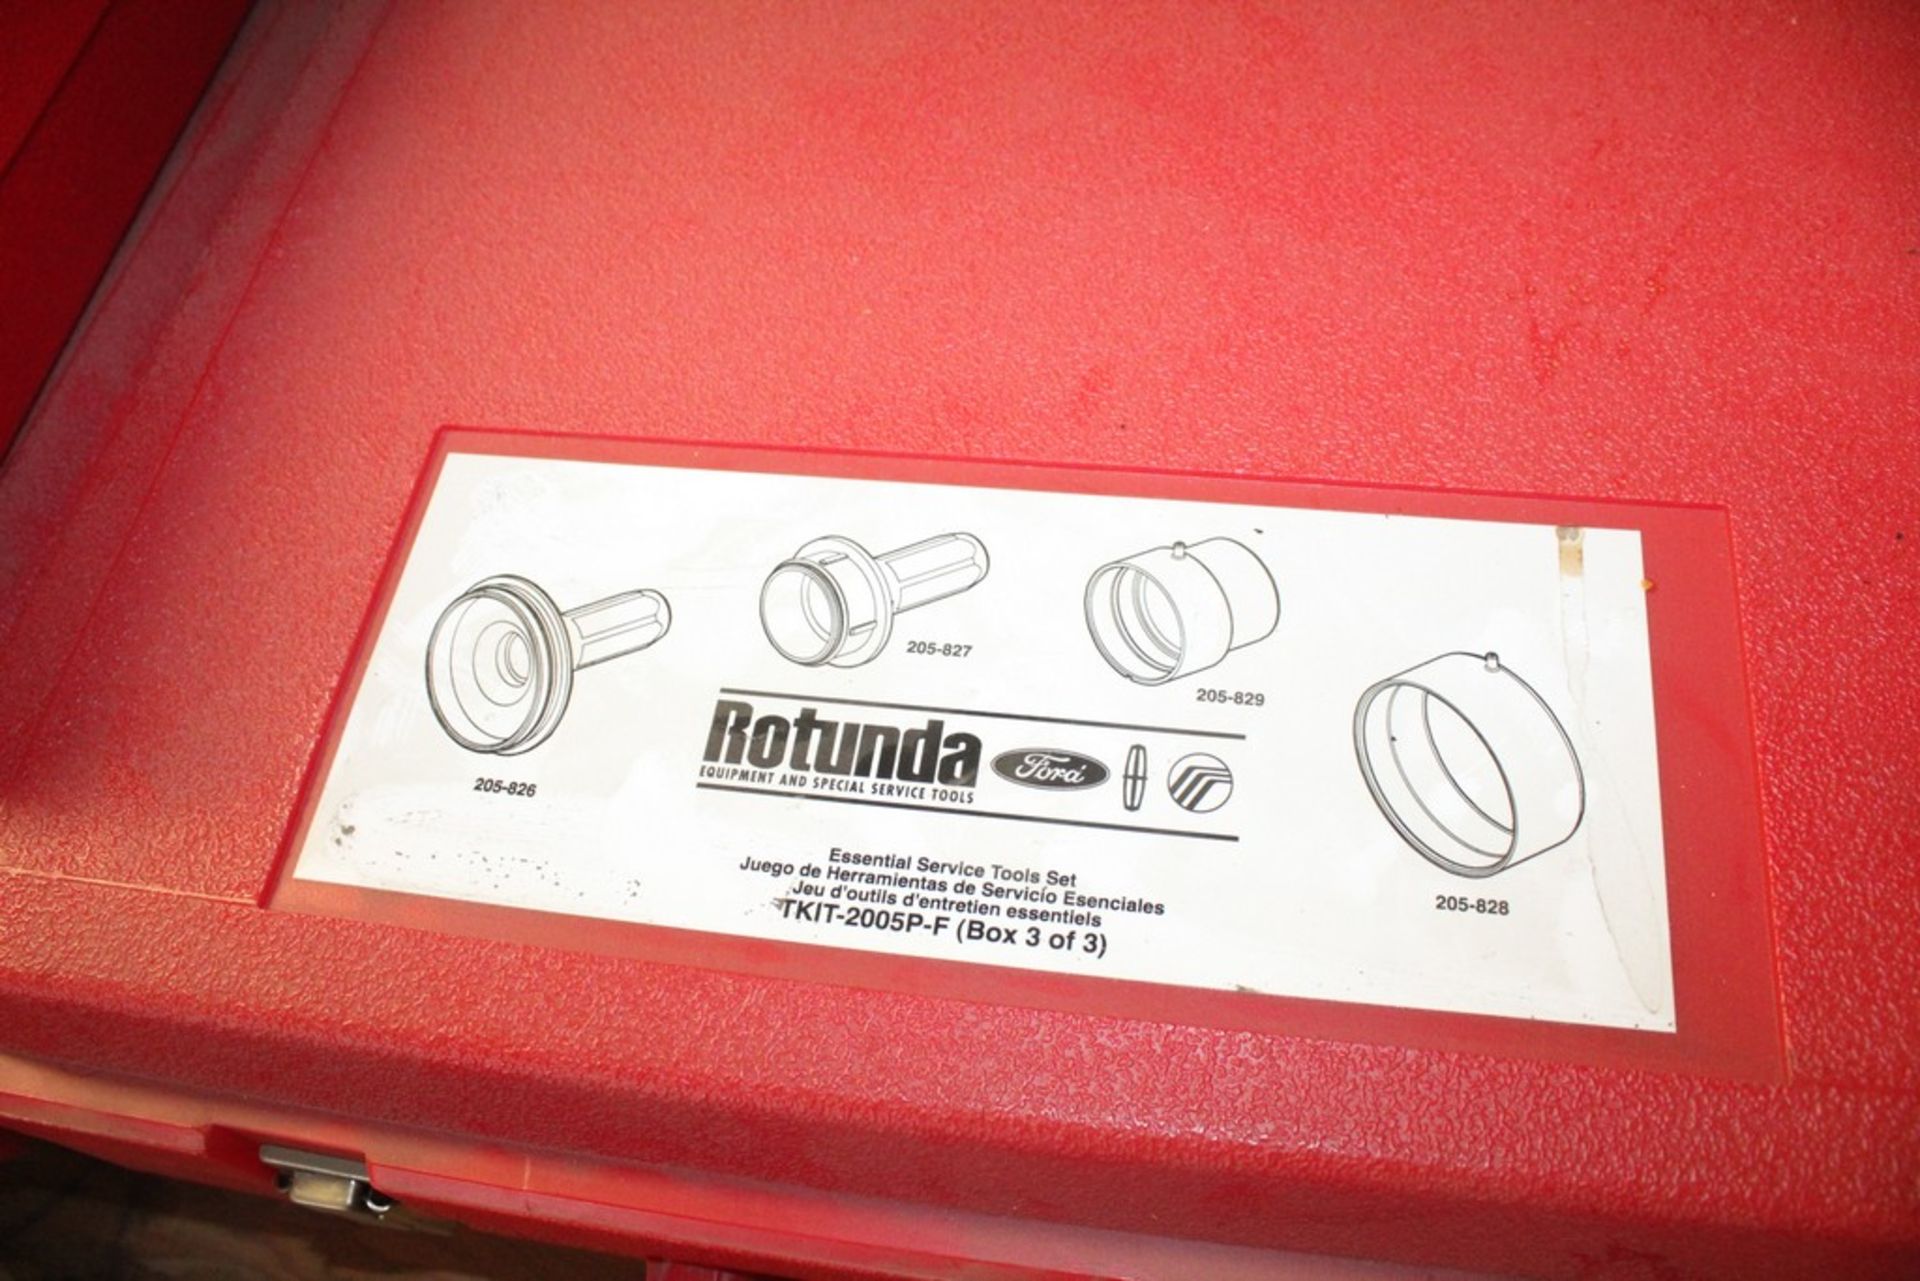 FORD ROTUNDA ESSENTIAL SERVICE TOOL SET-TKIT-2005P-F IN THREE CASES - Image 2 of 6